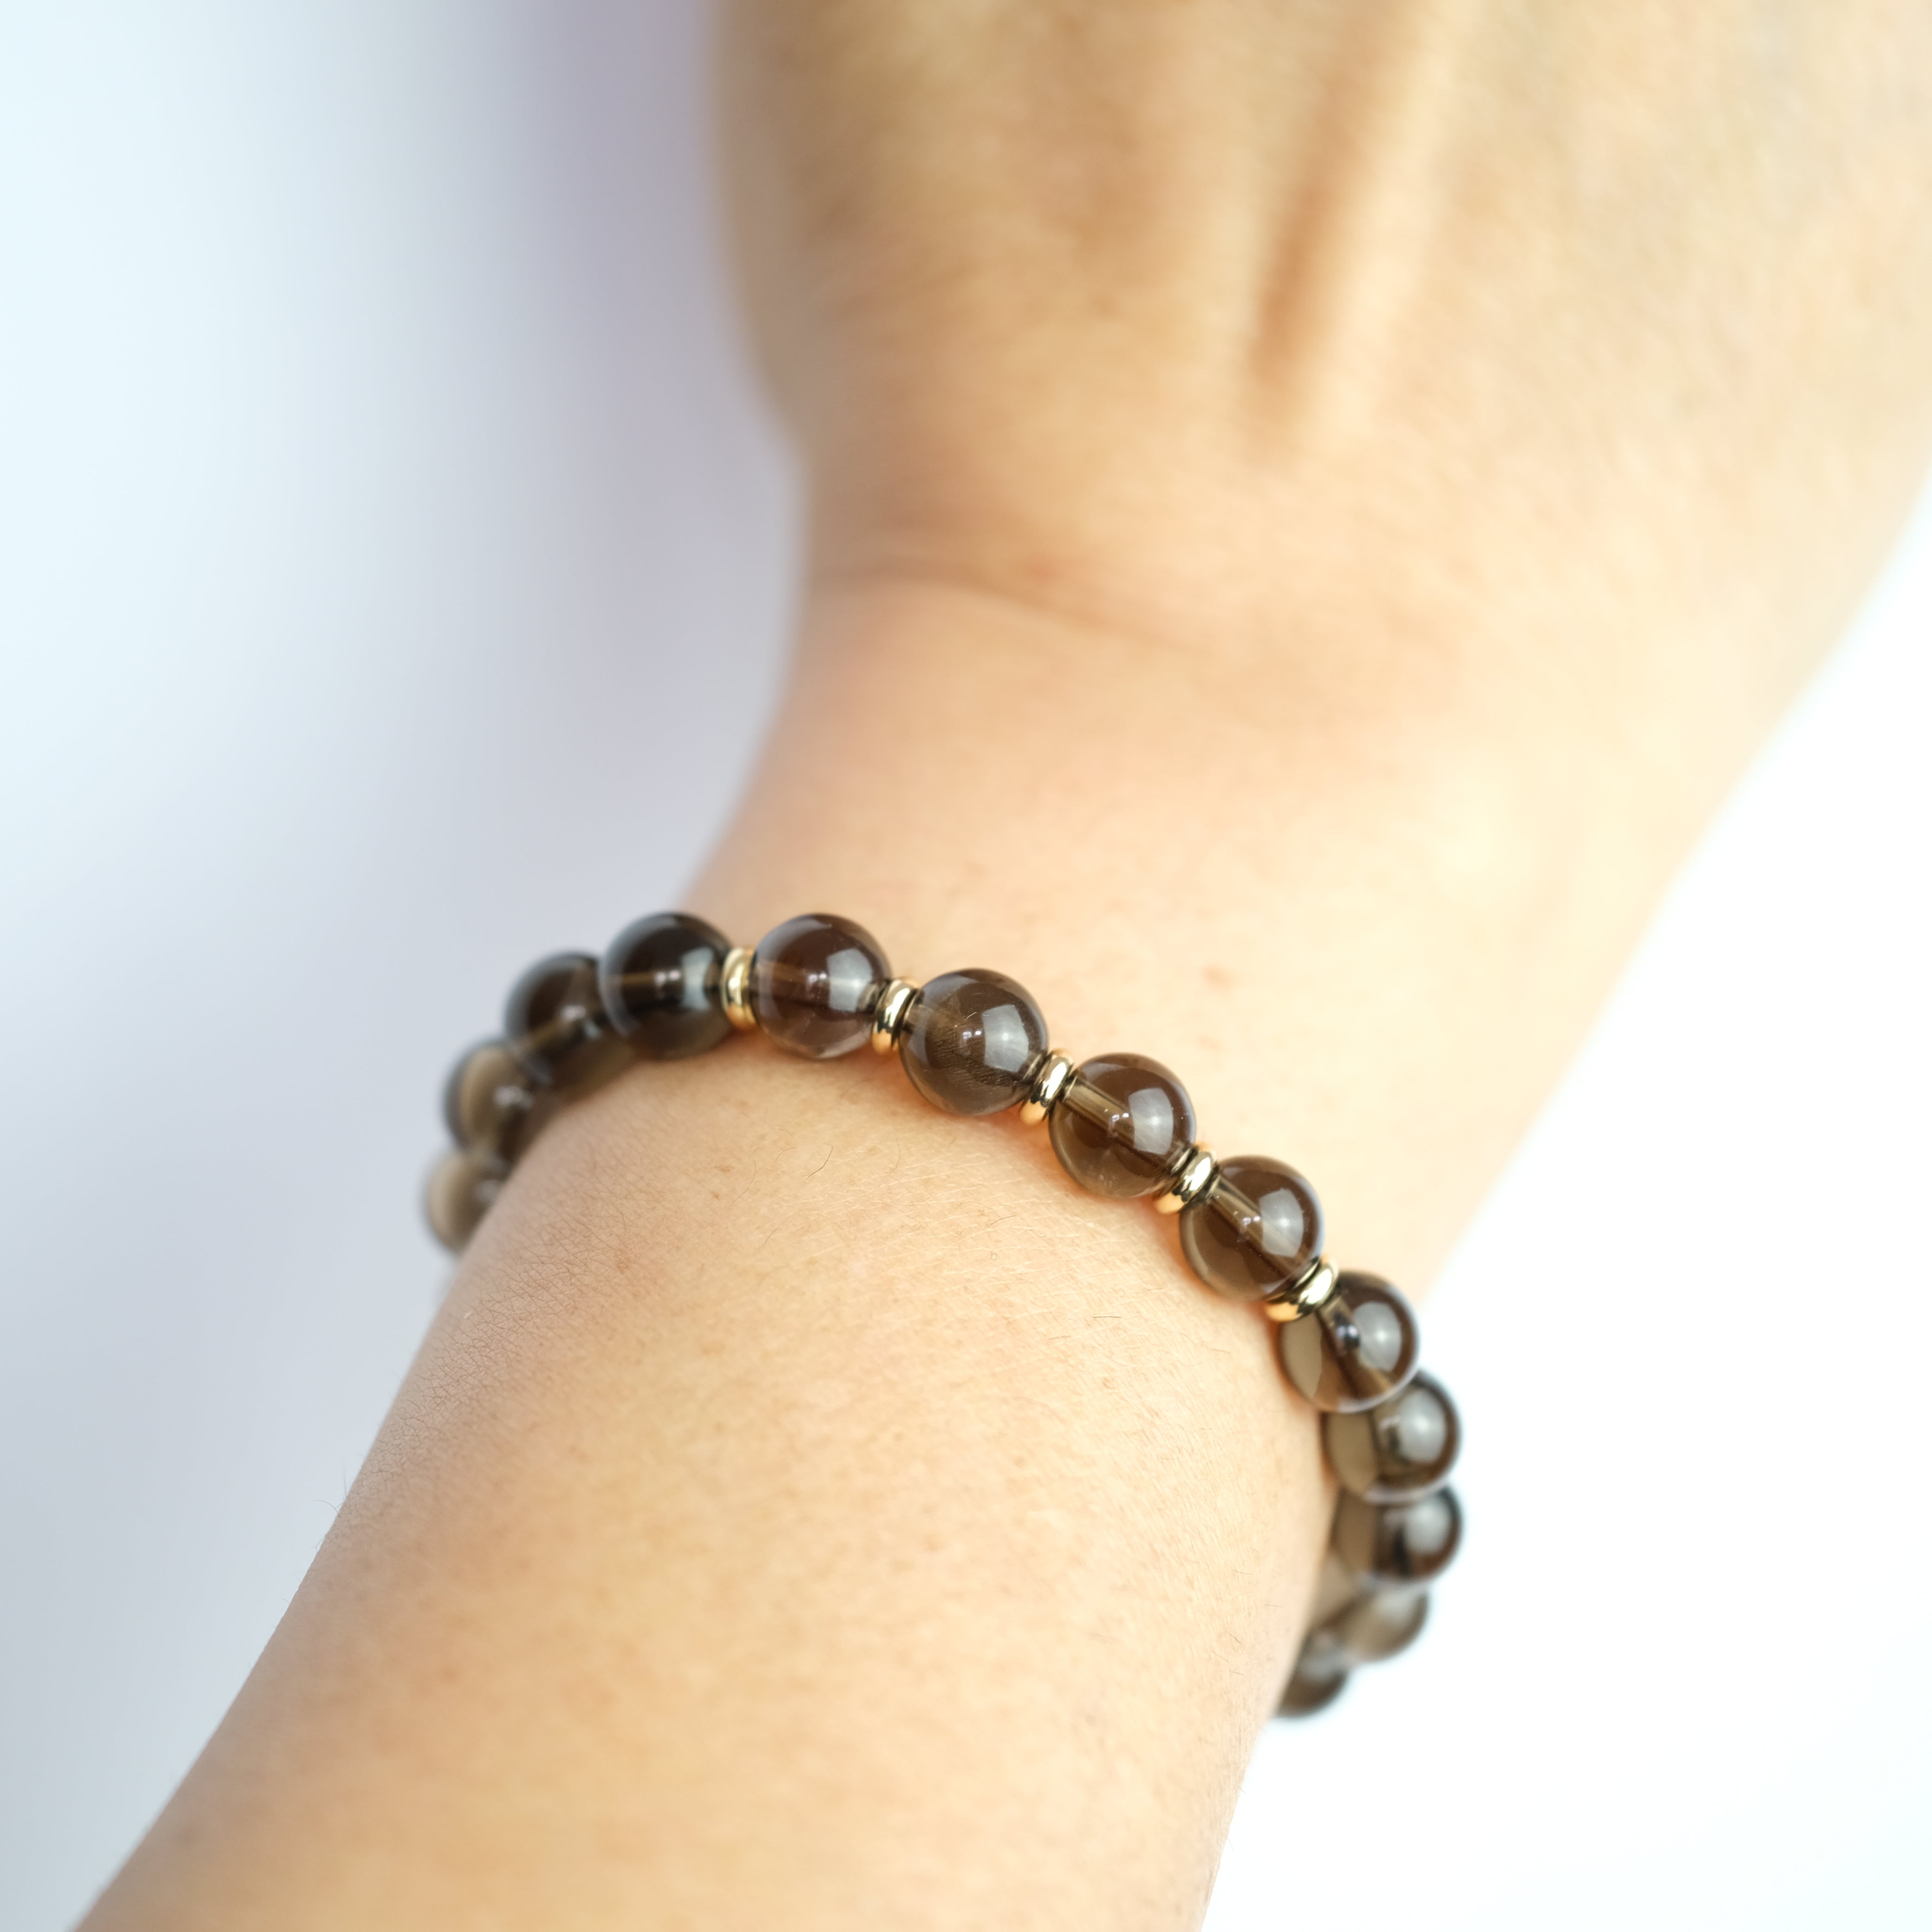 8mm Smoky Quartz Gemstone Bracelet with 18ct gold plated accessories on a models wrist 